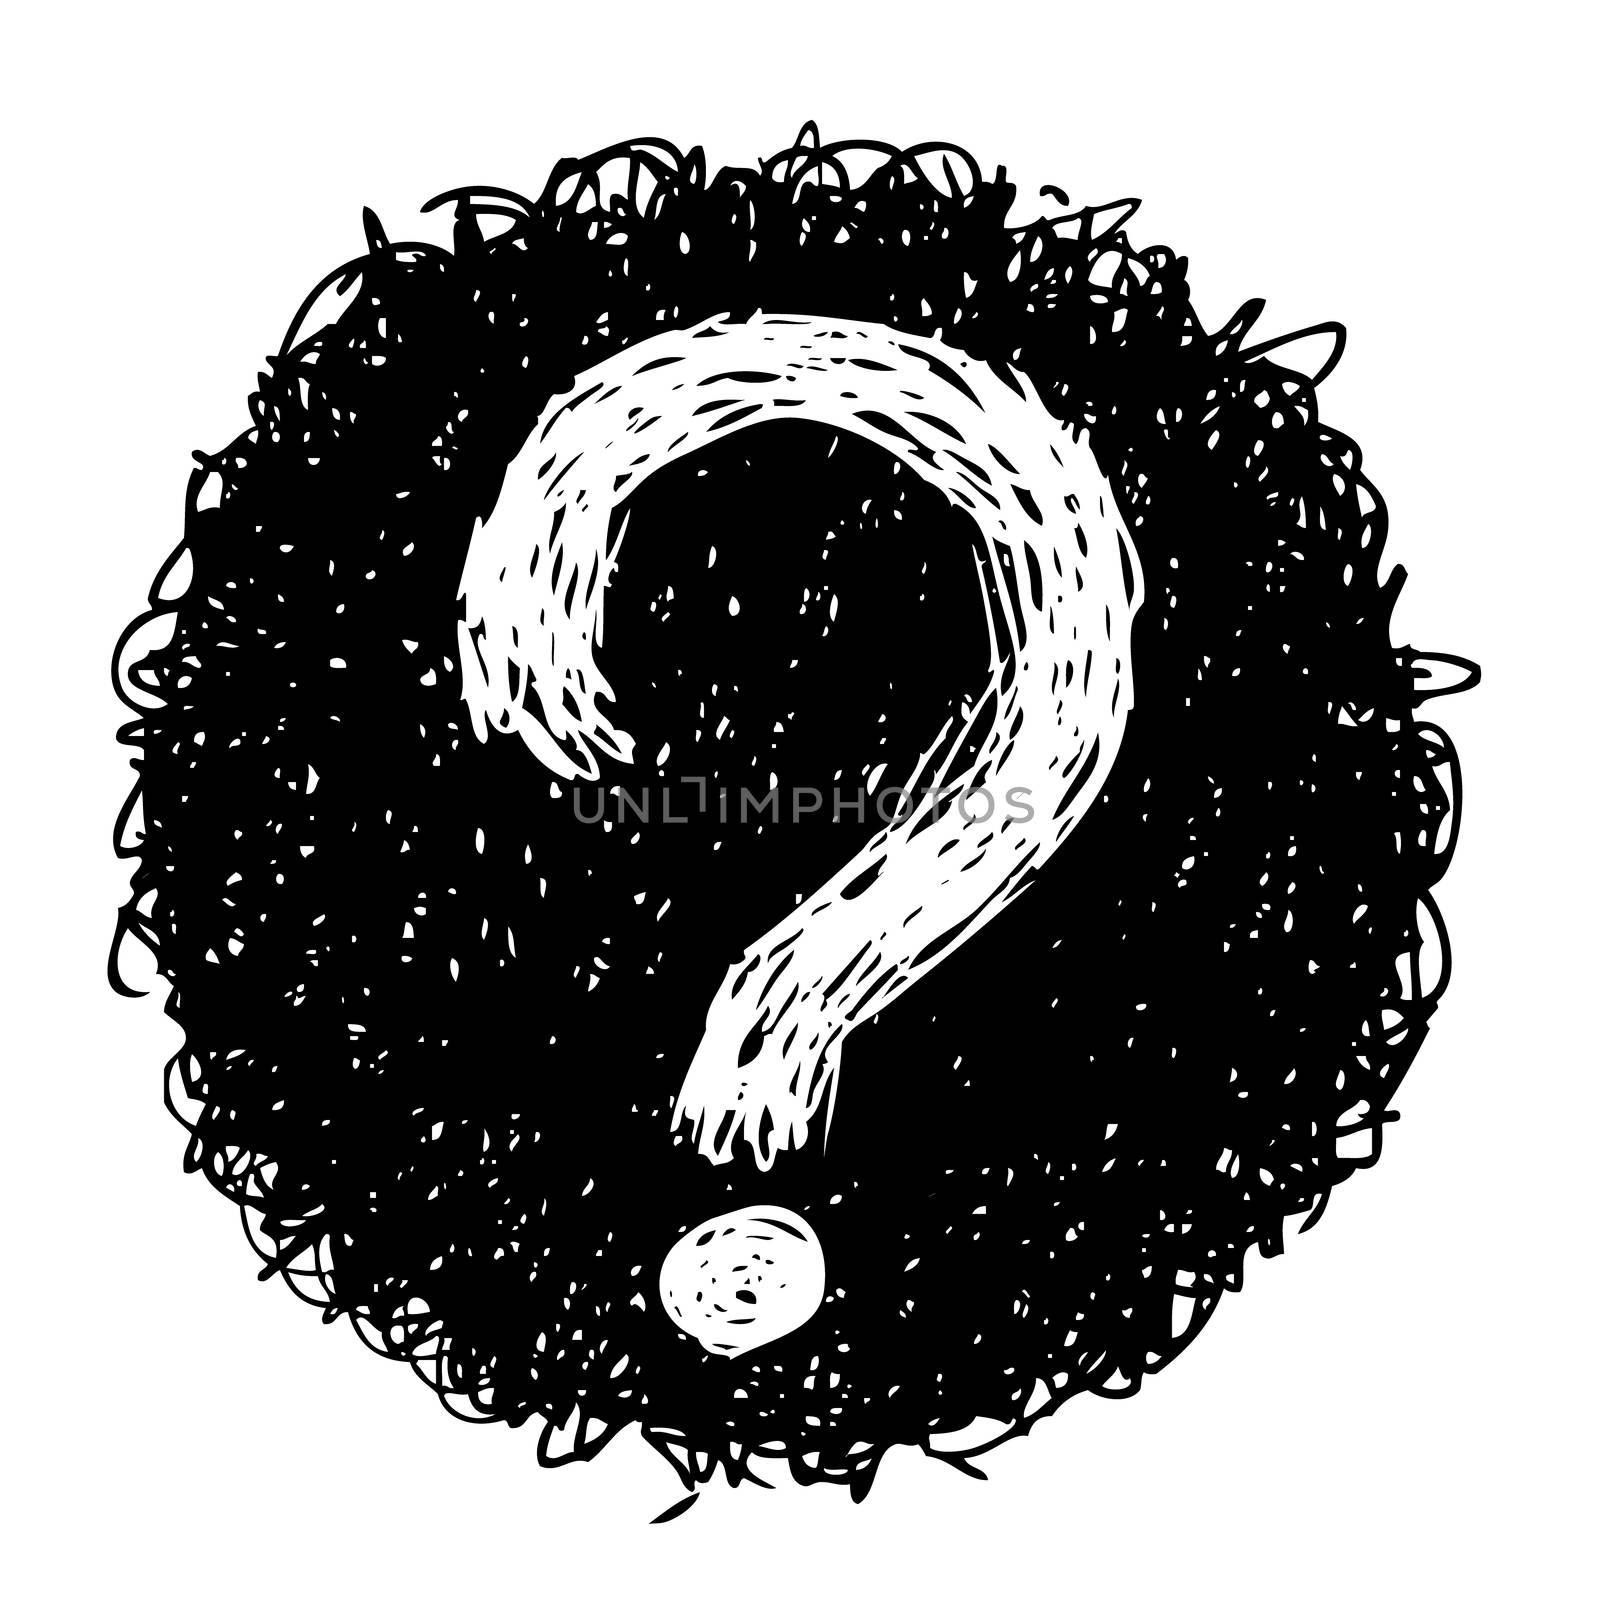 freehand sketch illustration of question marks doodle hand drawn